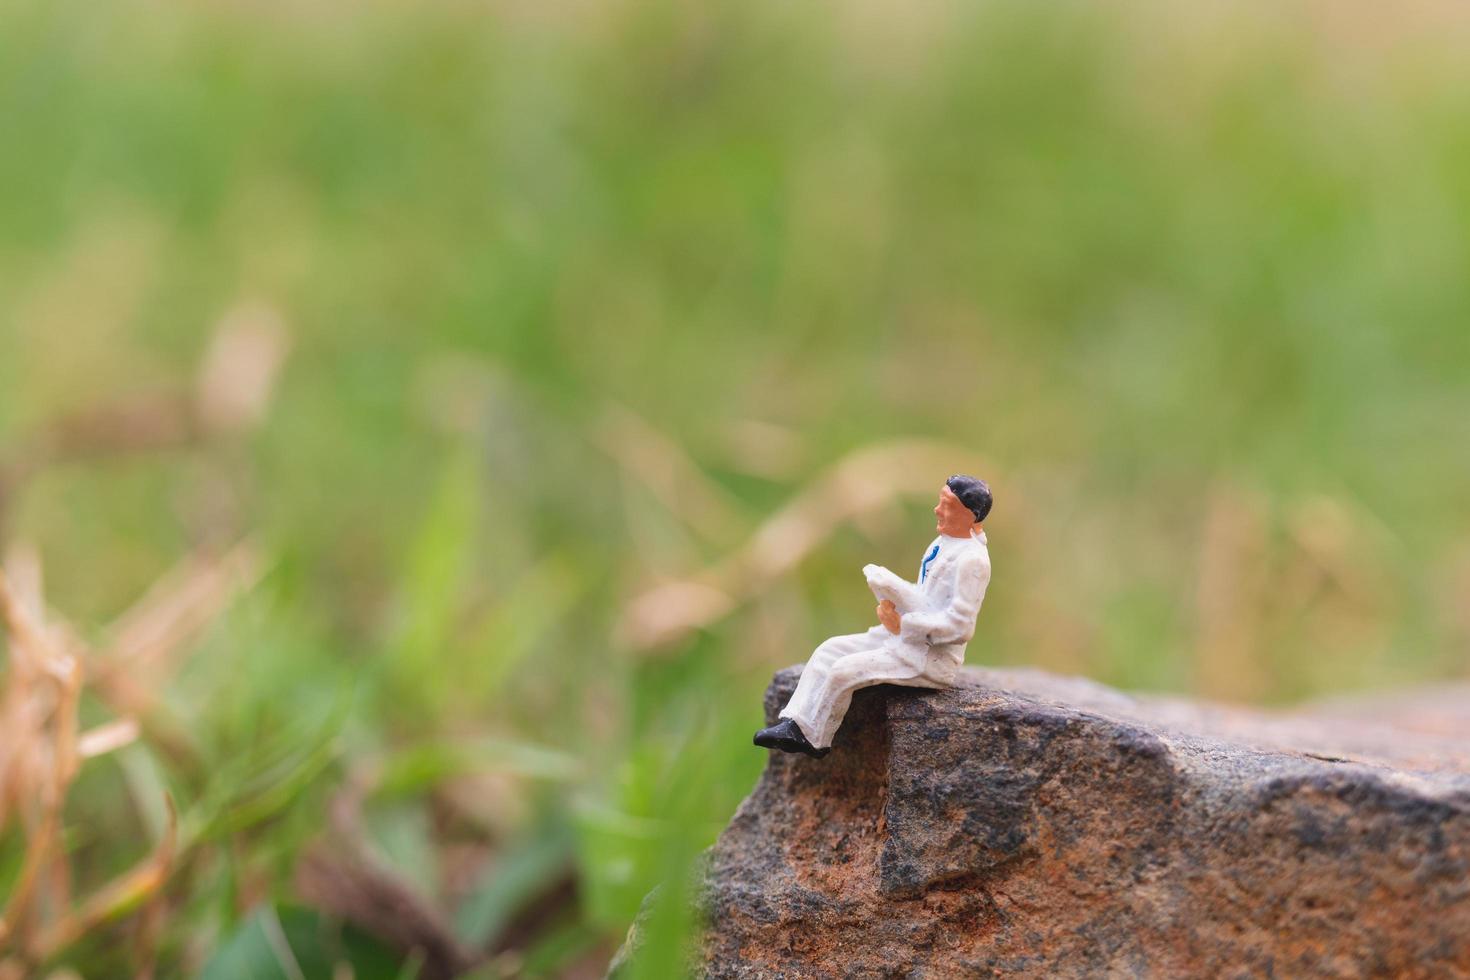 Miniature businessman reading a newspaper on a rock with a nature background photo